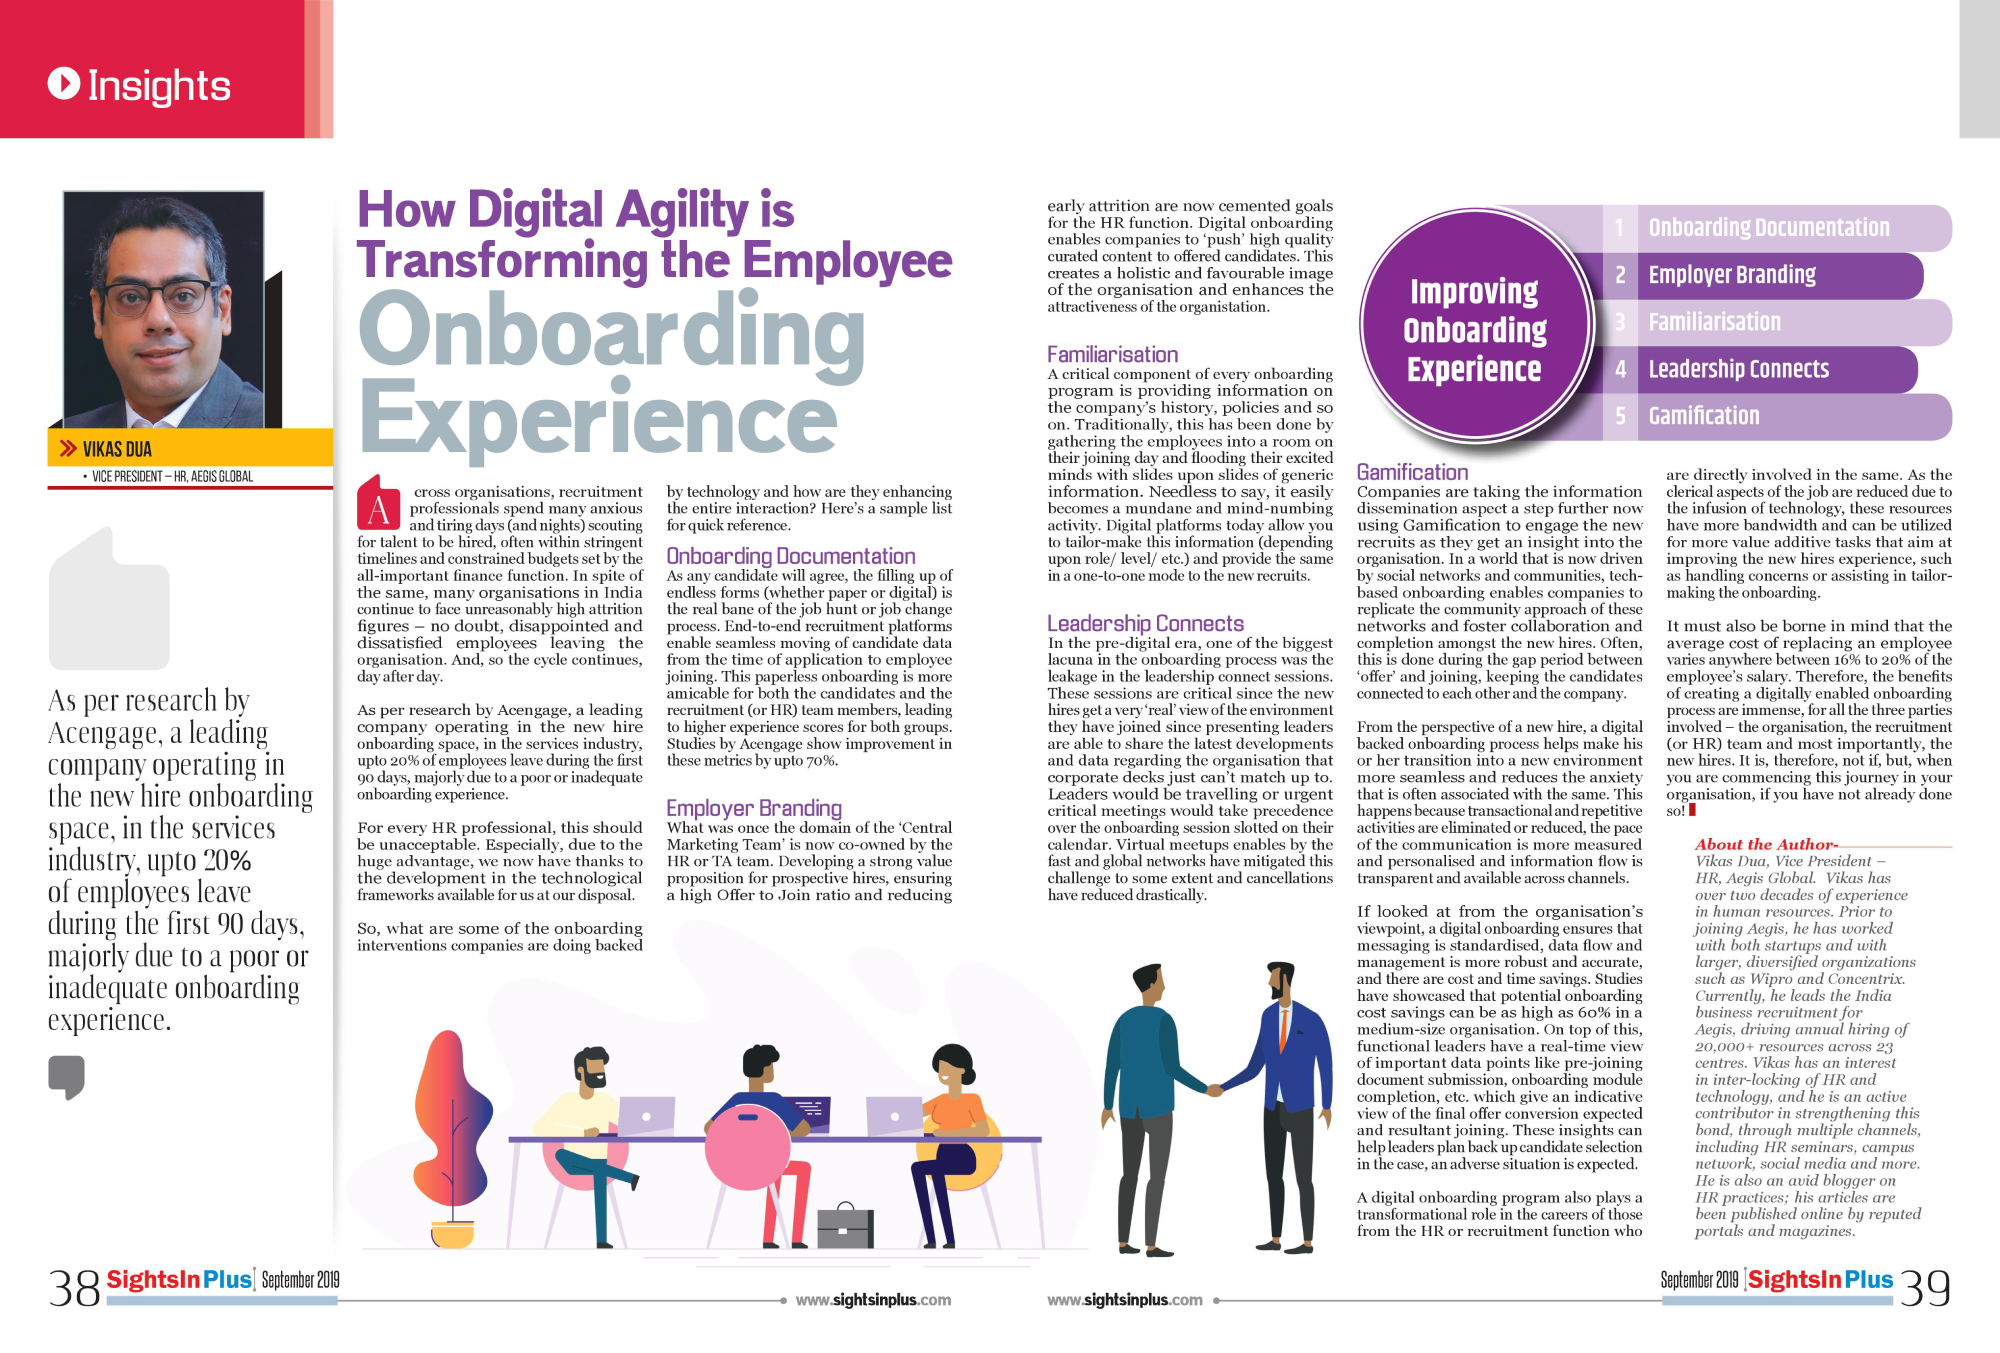 How Digital Agility is Transforming the Employee